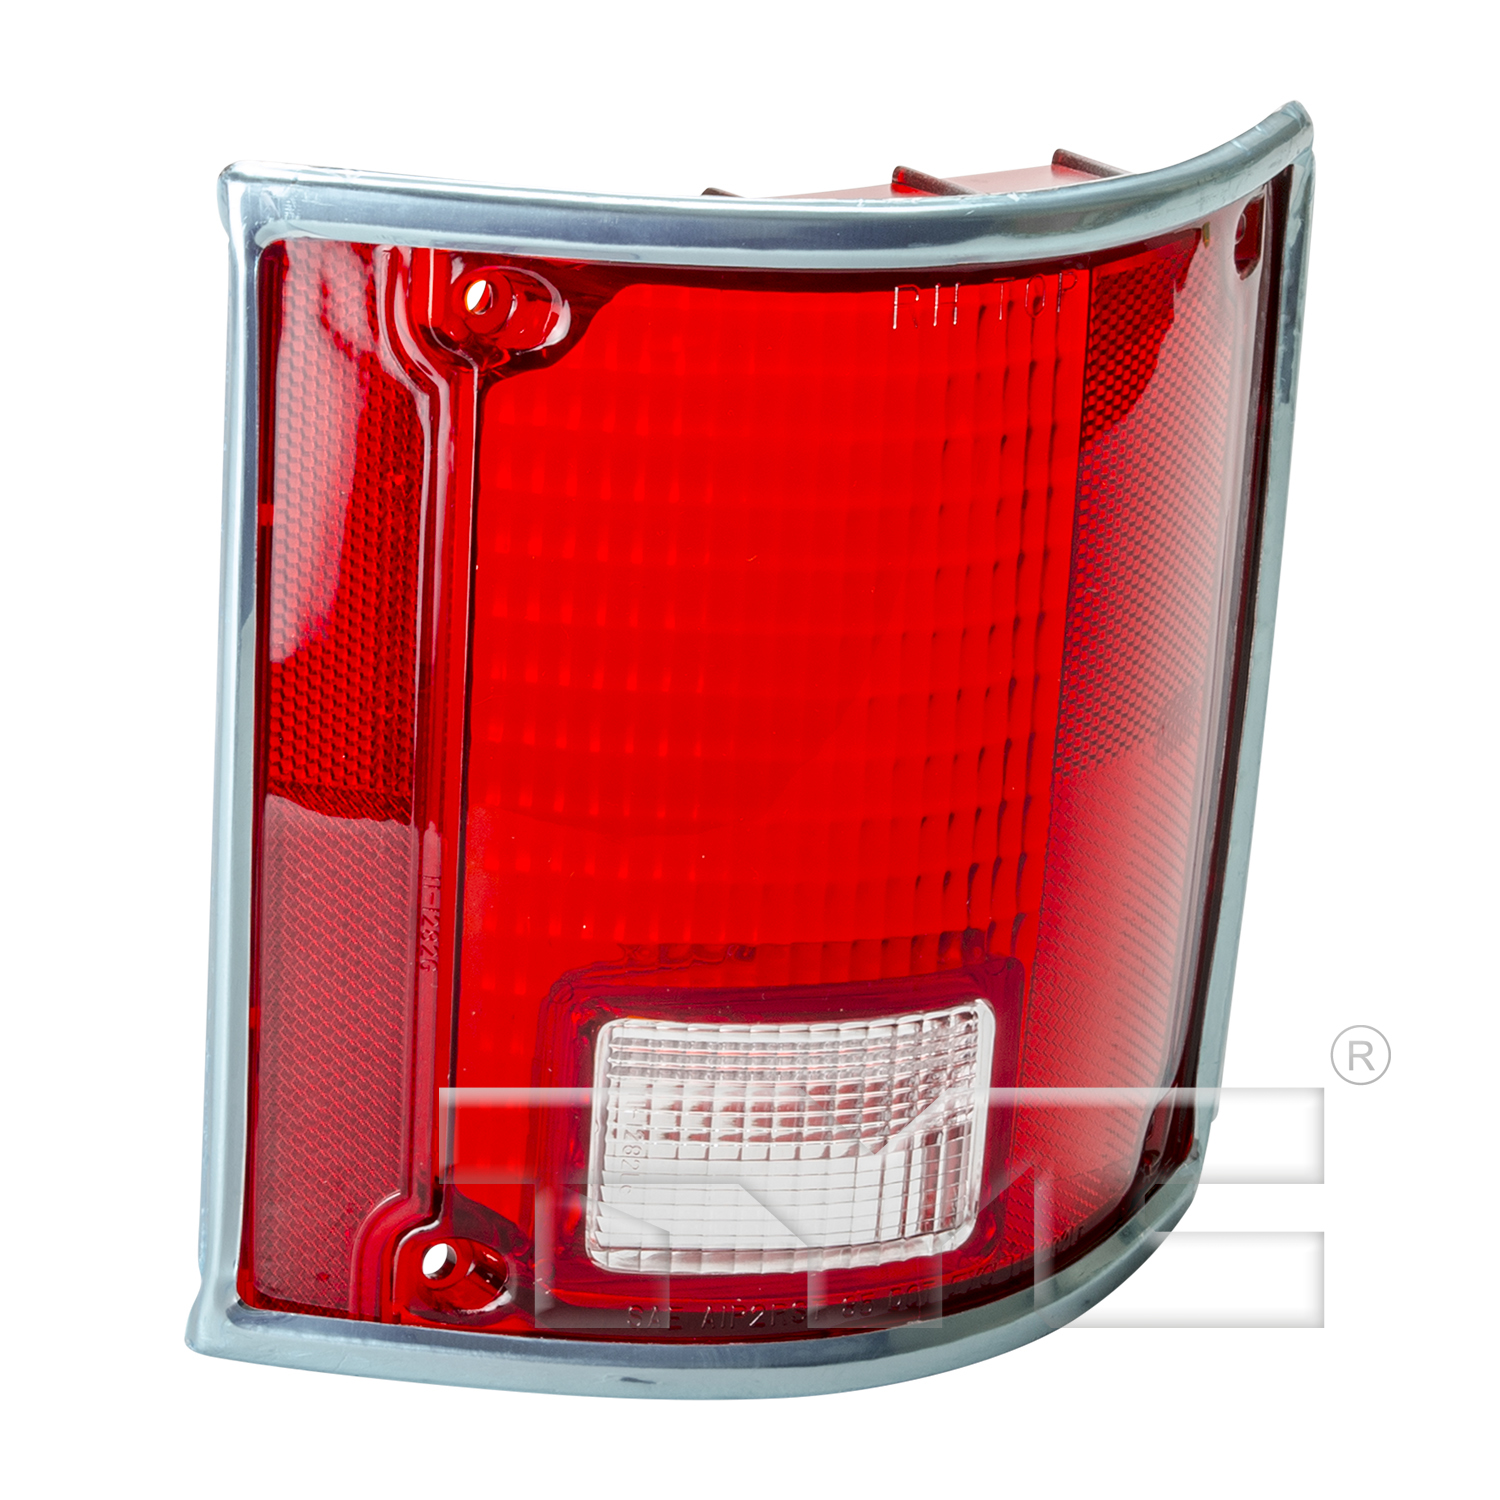 Aftermarket TAILLIGHTS for GMC - C3500, C3500,79-87,RT Taillamp lens